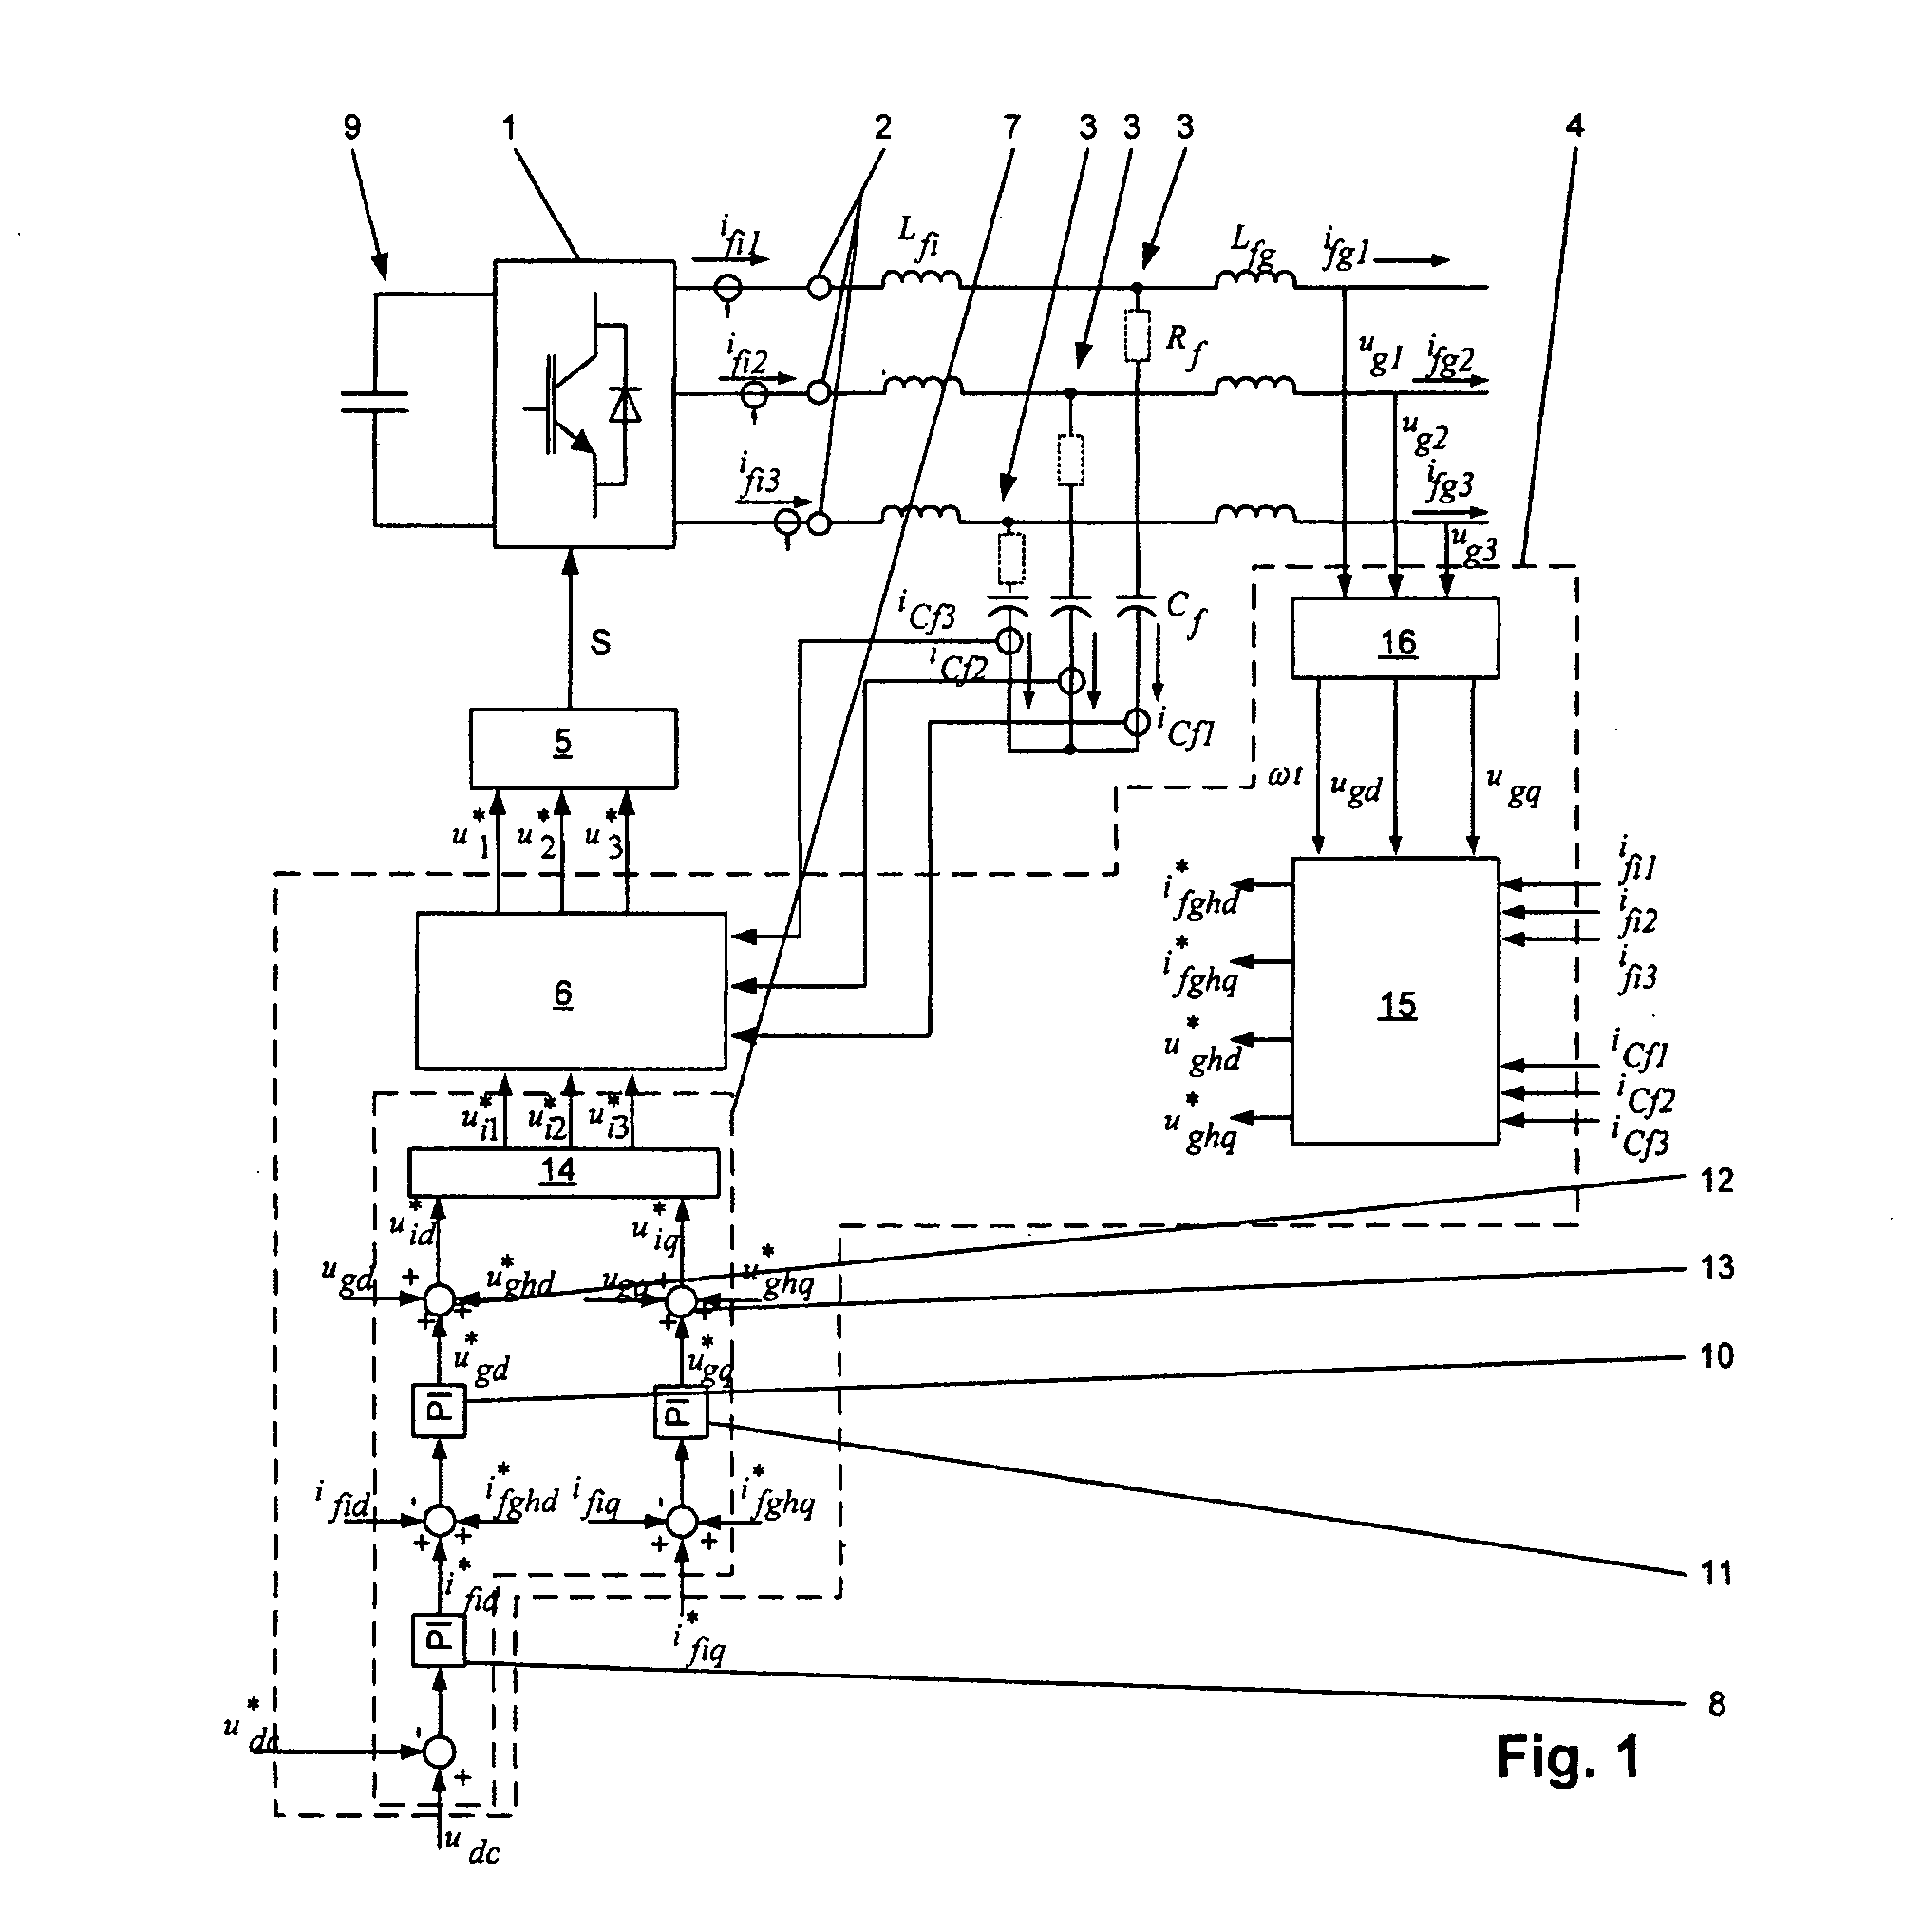 Method for operation of a converter circuit, as well as an apparatus for carrying out the method